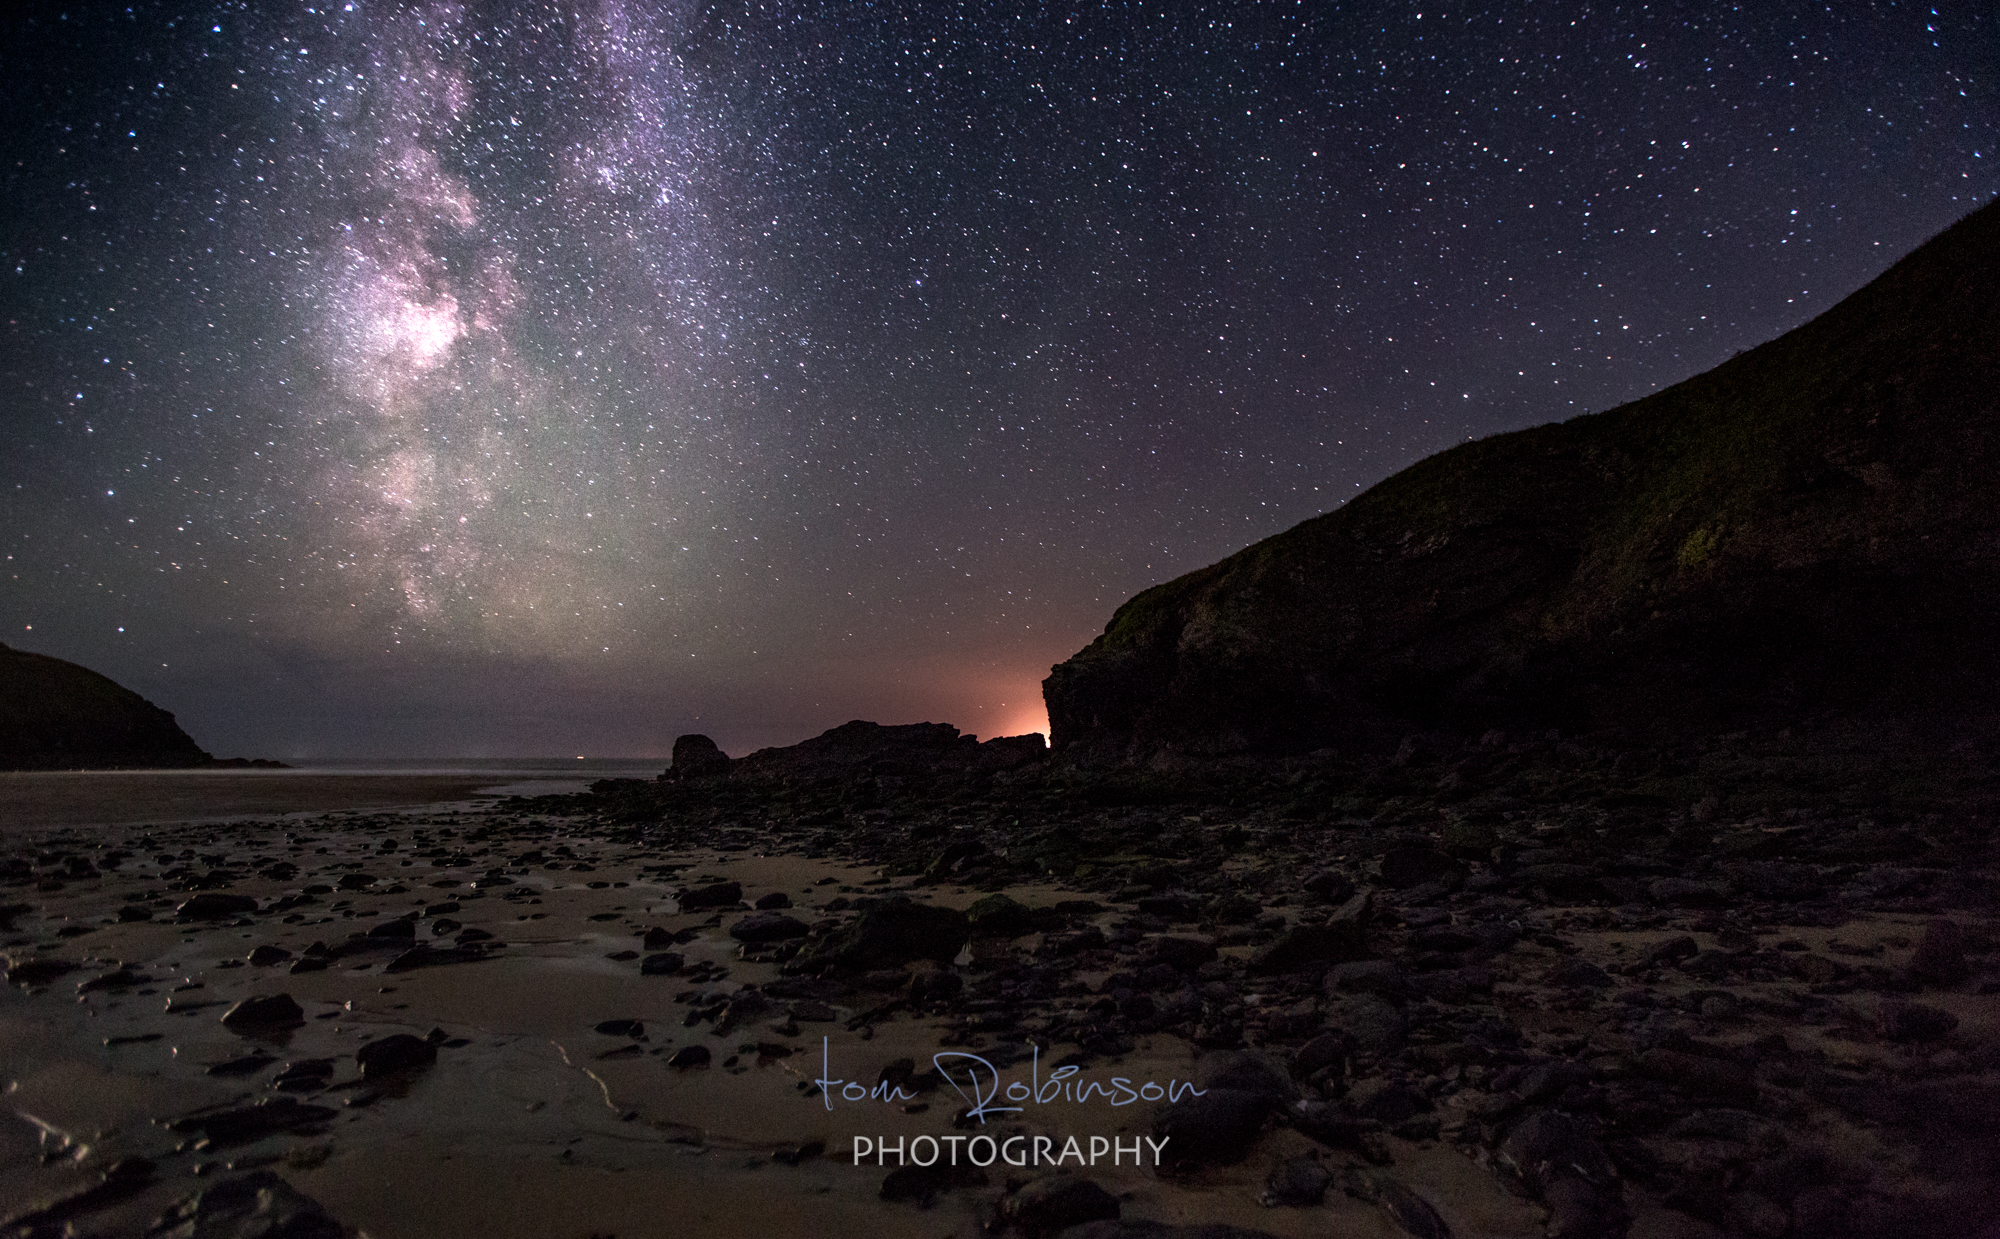 Poldhu by night from the Cornwall by night collection by Tom Robinson Photography